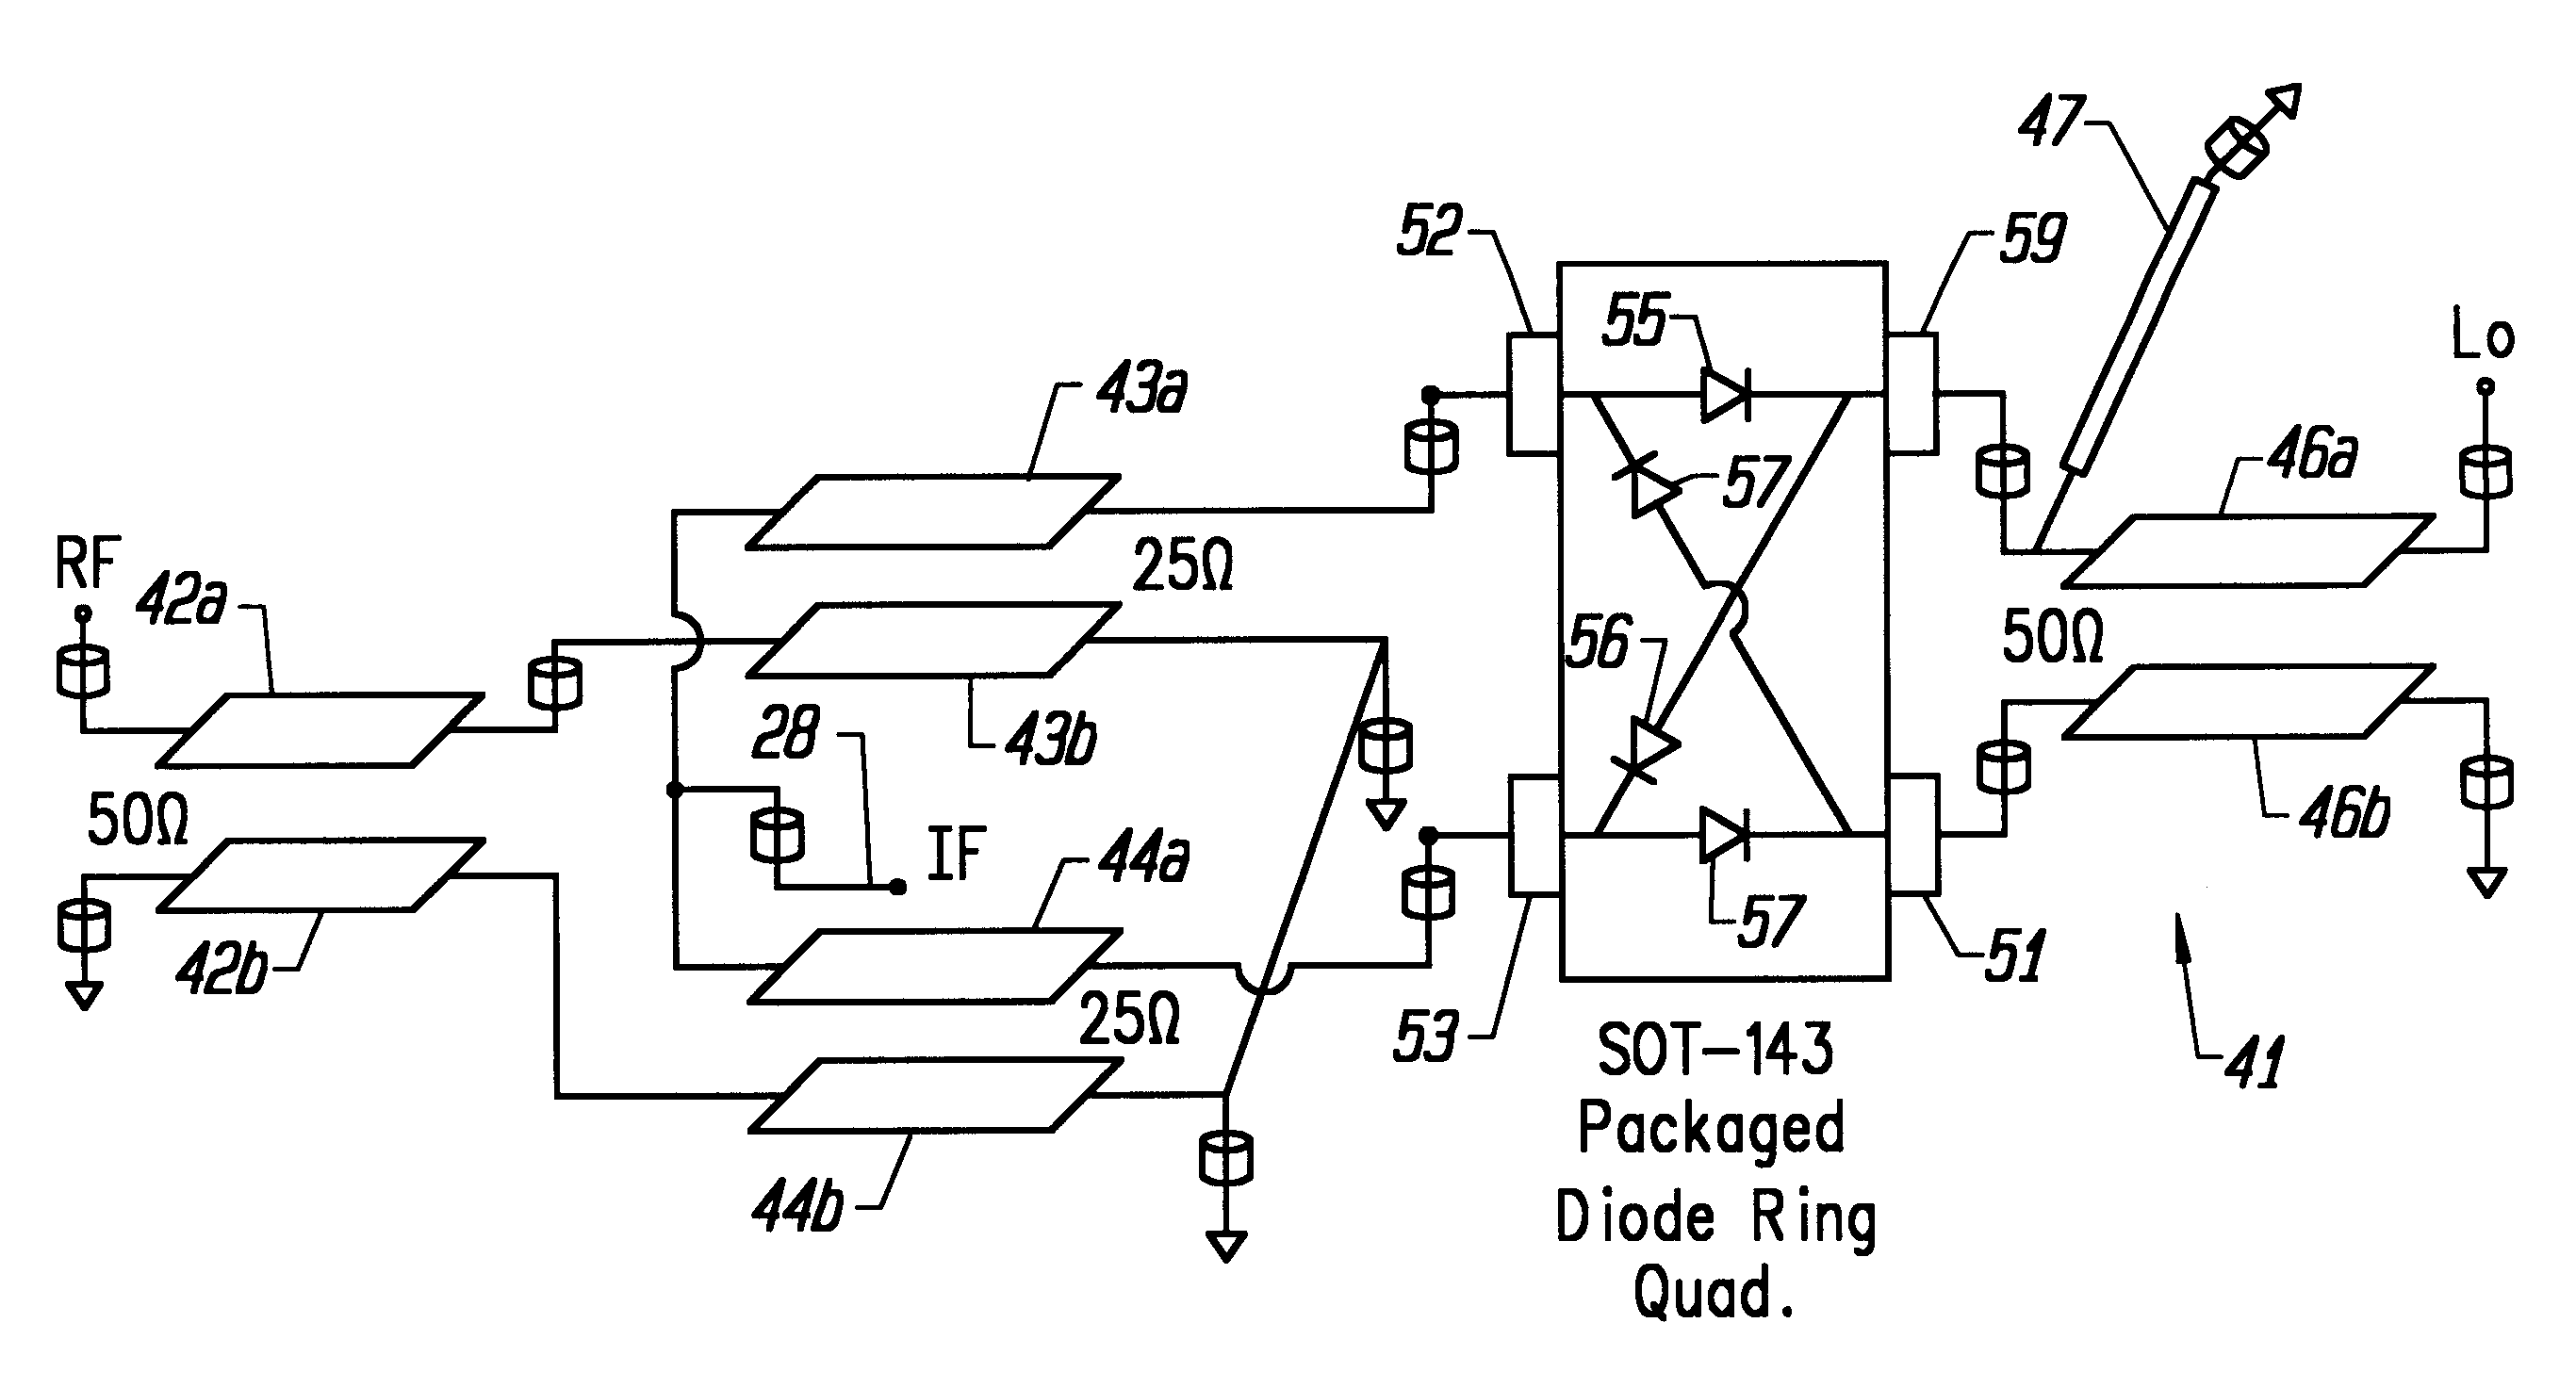 Multi-layer printed wiring board having integrated broadside microwave coupled baluns